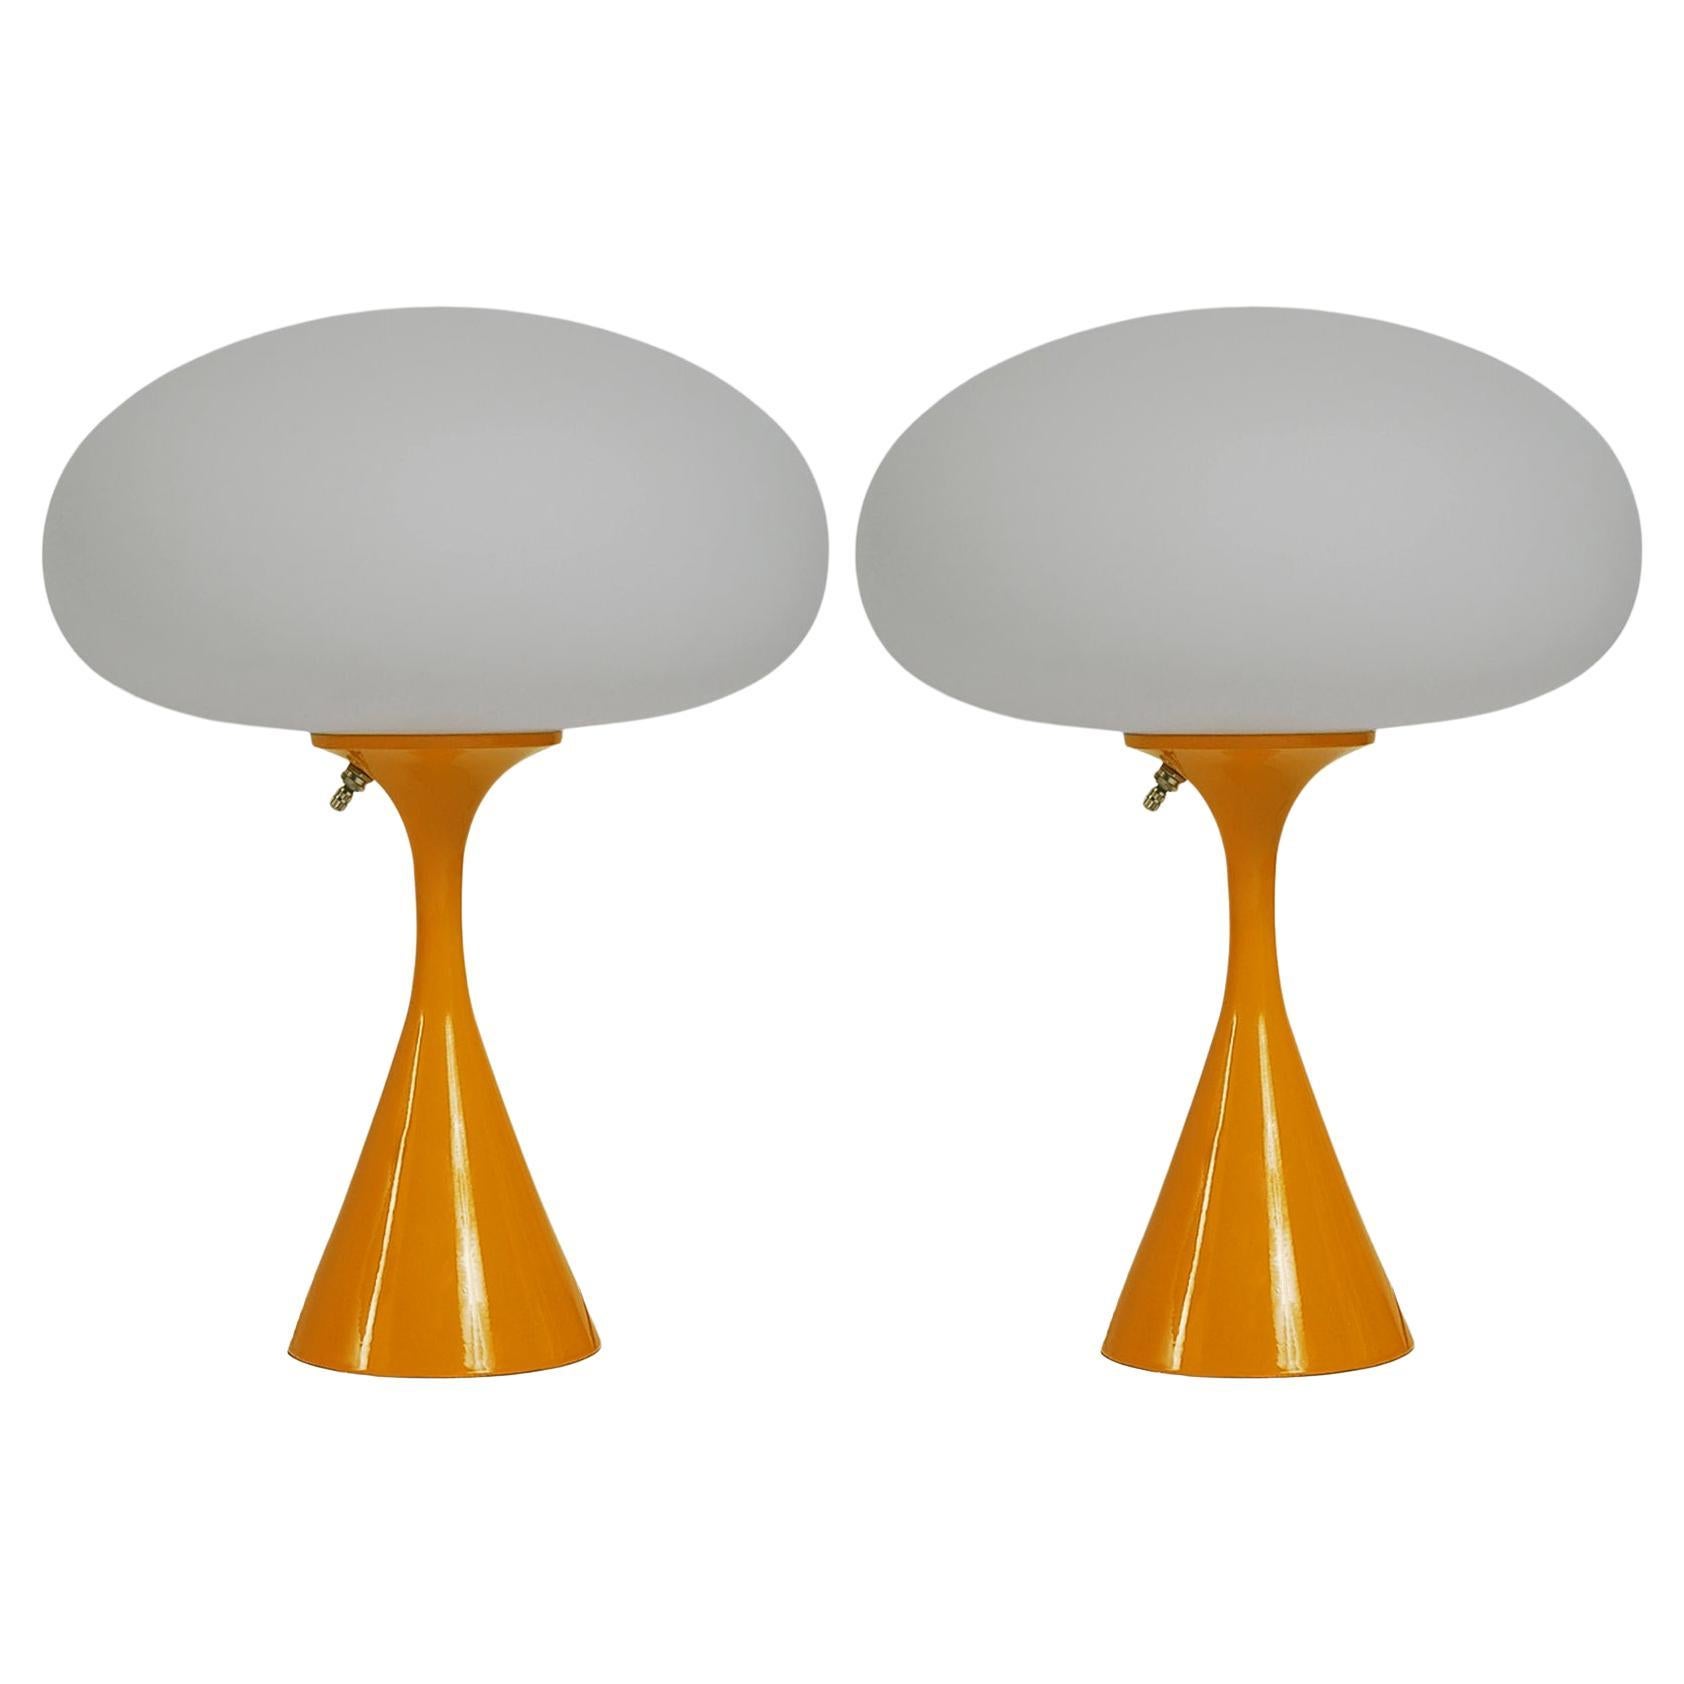 Pair of Mid-Century Modern Table Lamps by Designline in Orange & White Glass For Sale